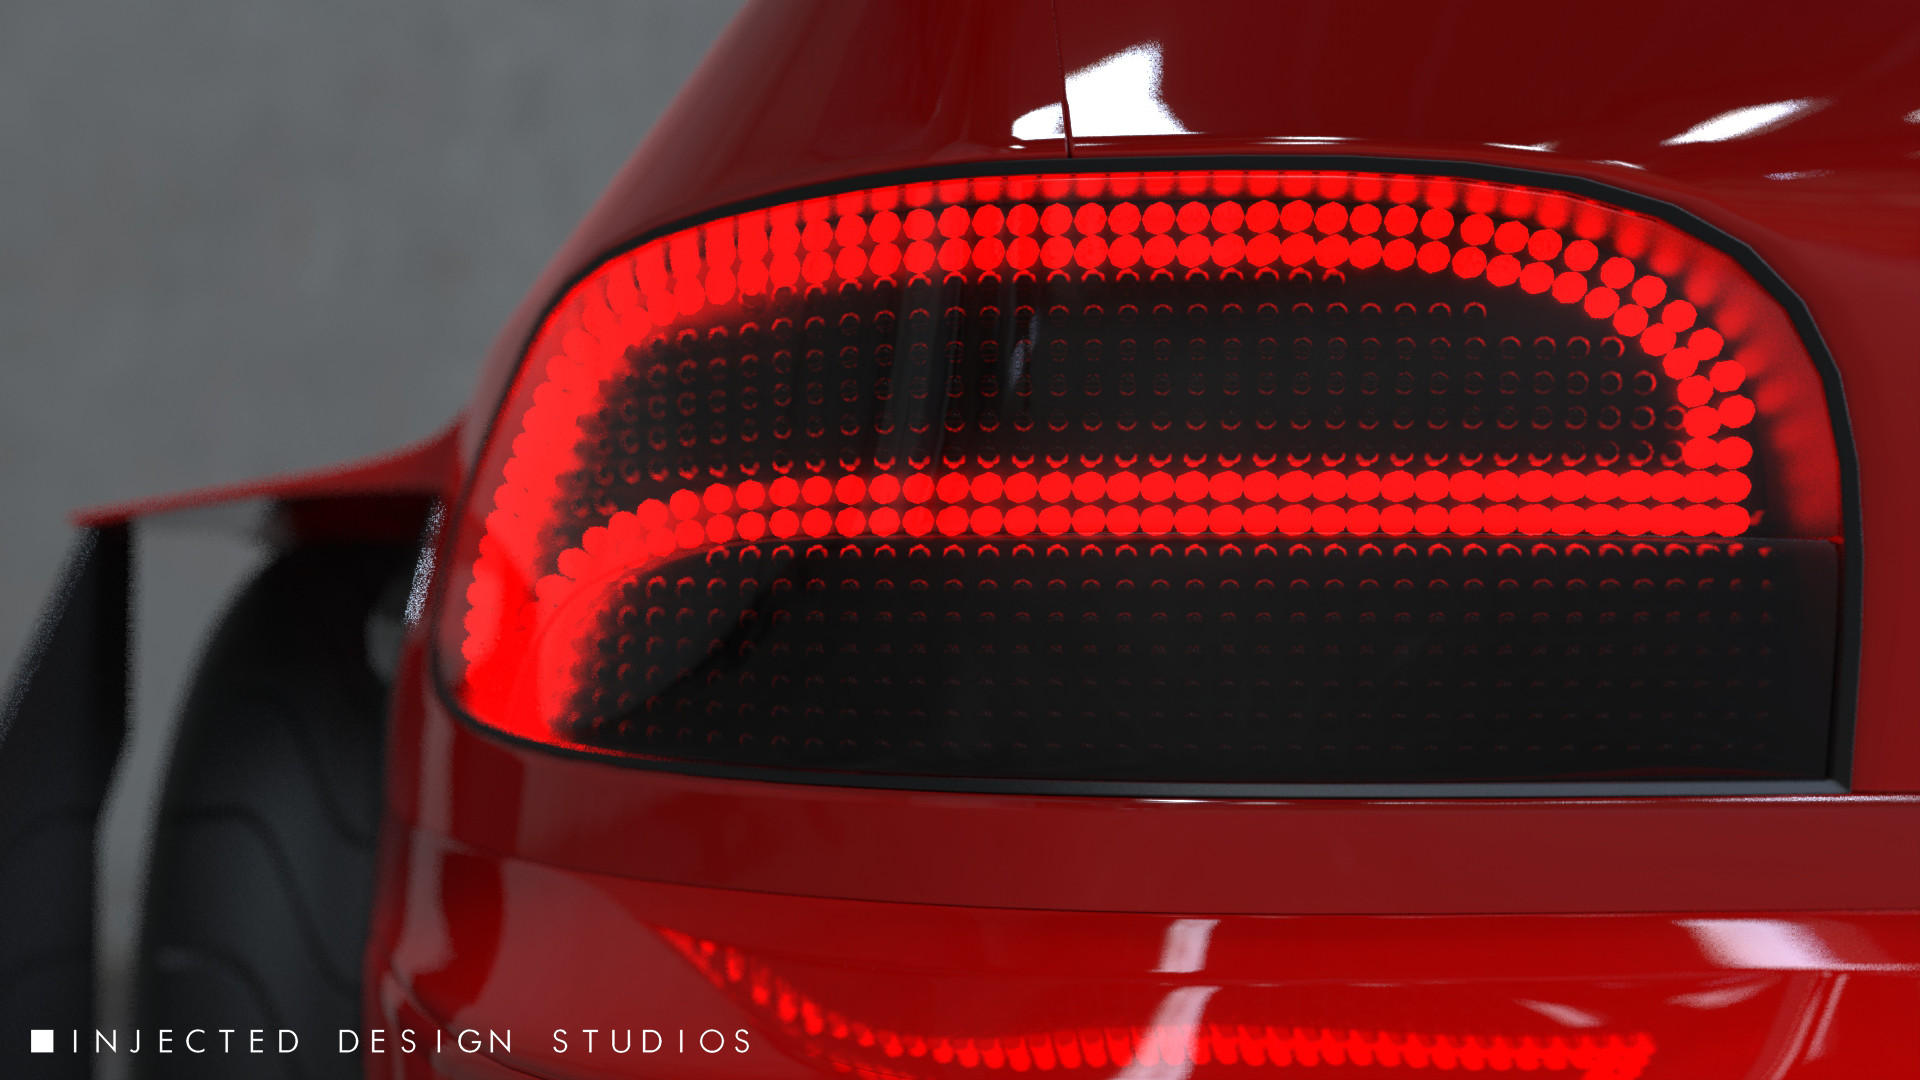 Just some work I've been doing on tail lights.